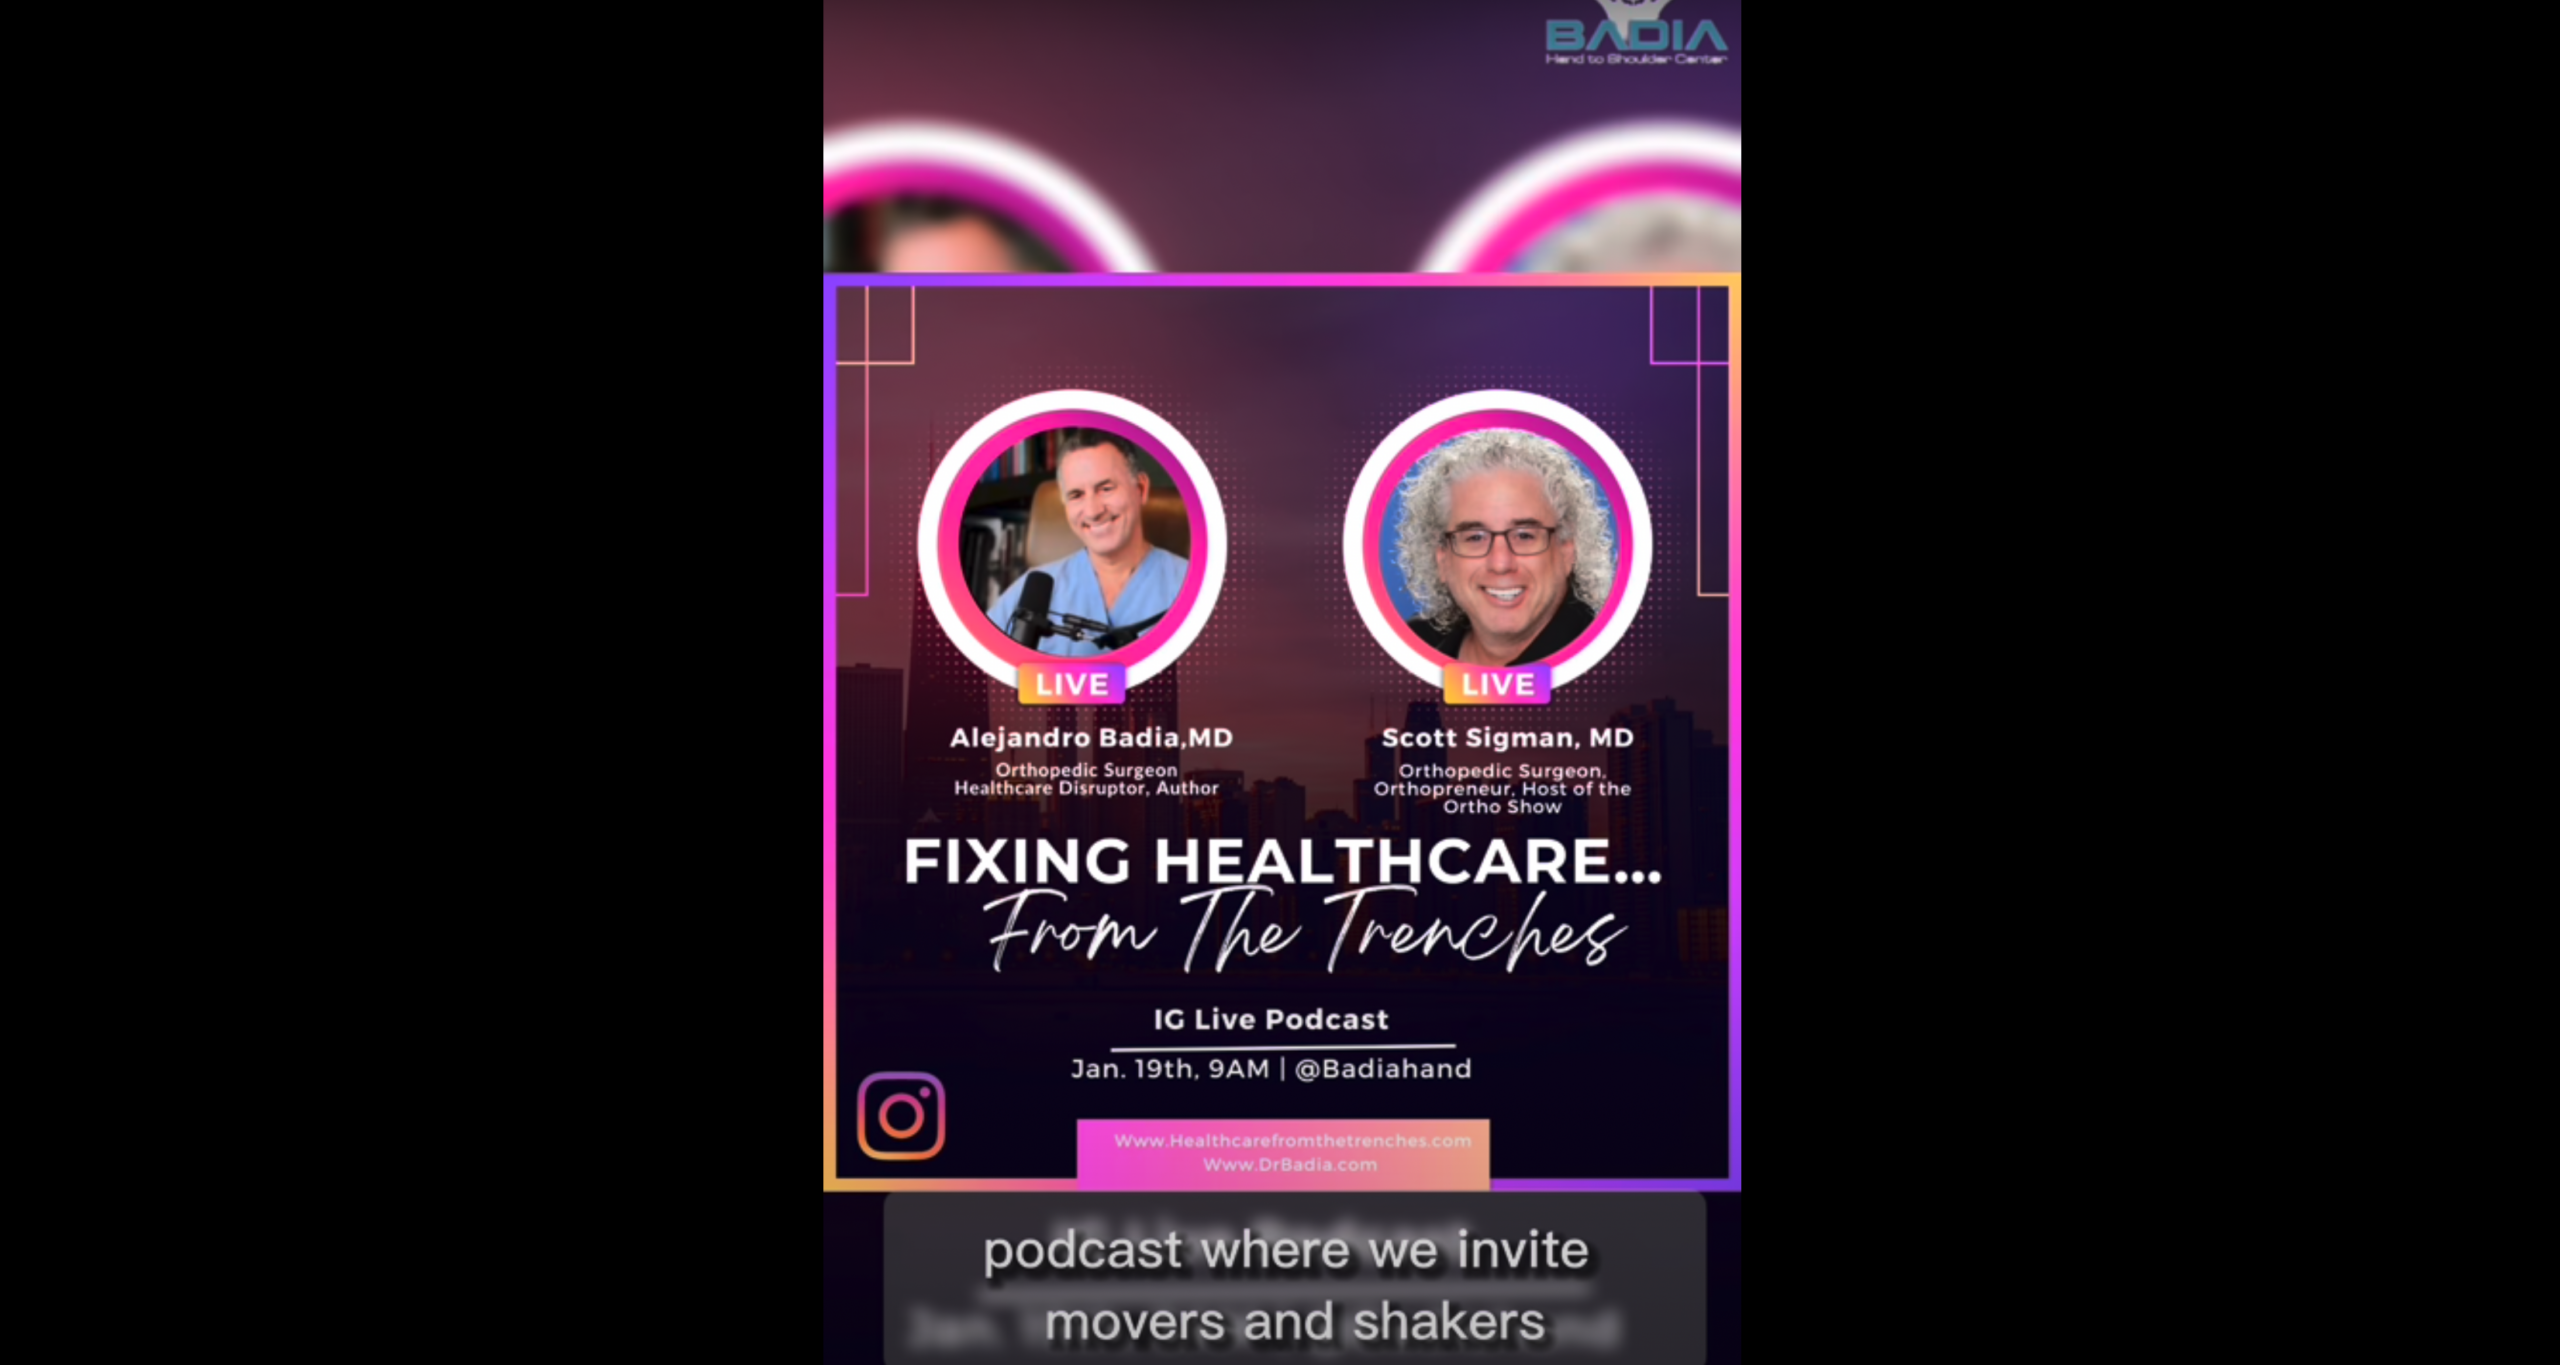  Dr. Scott Sigman on "Fixing Healthcare...From The Trenches